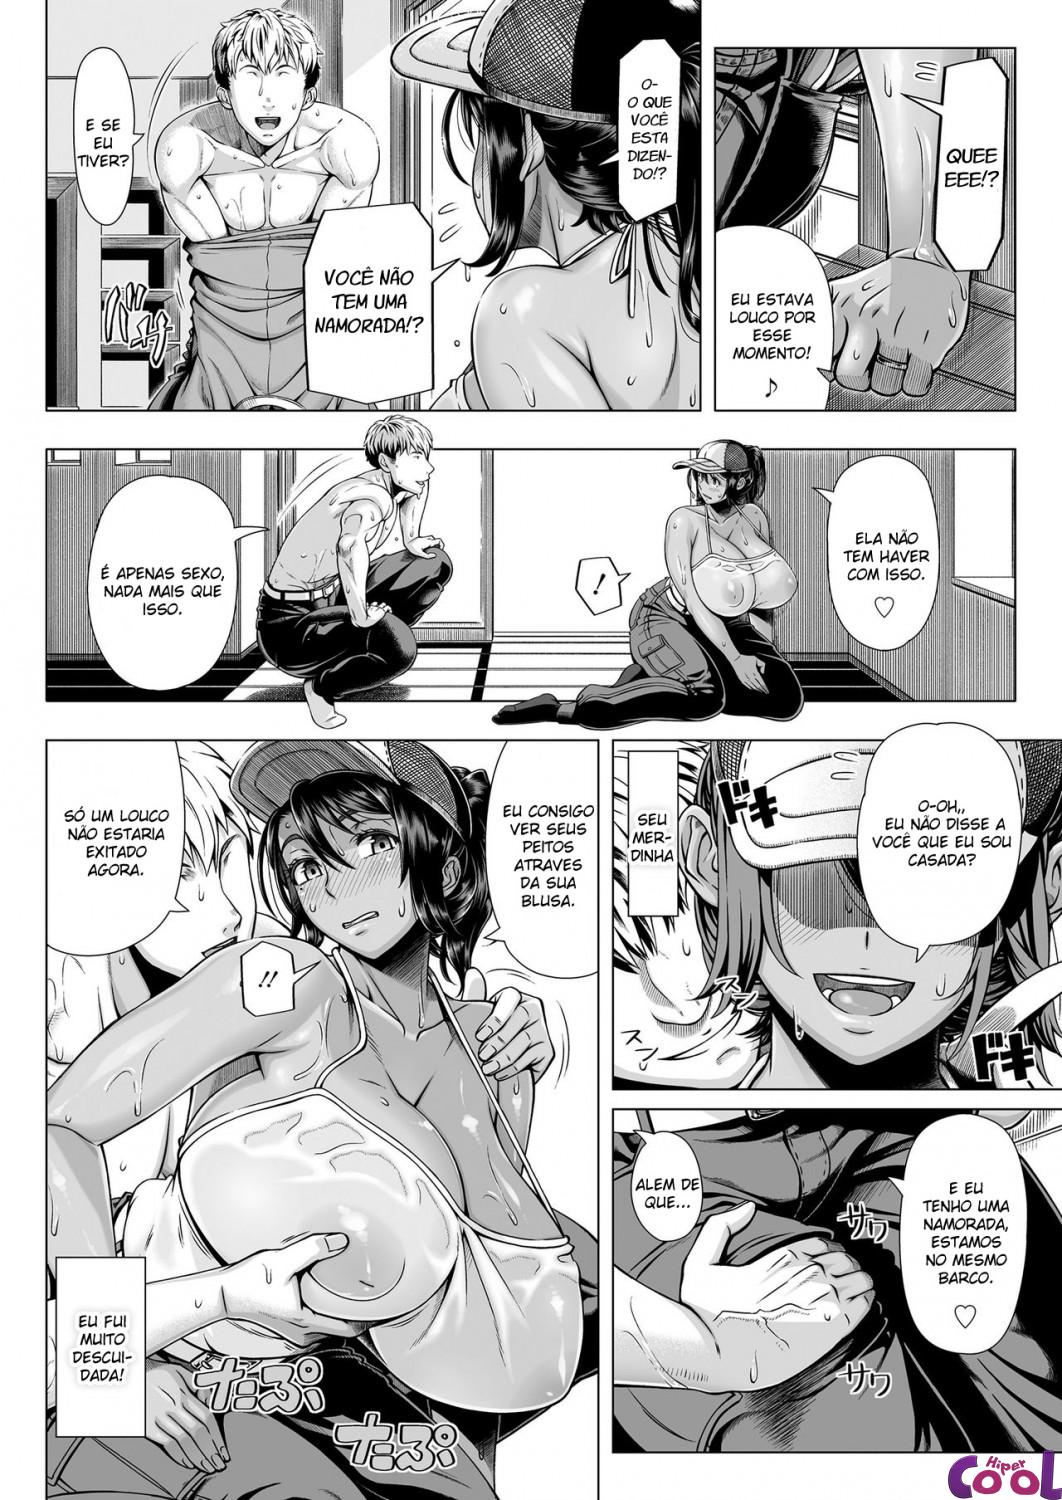 delivery-sex-chapter-01-page-7.jpg